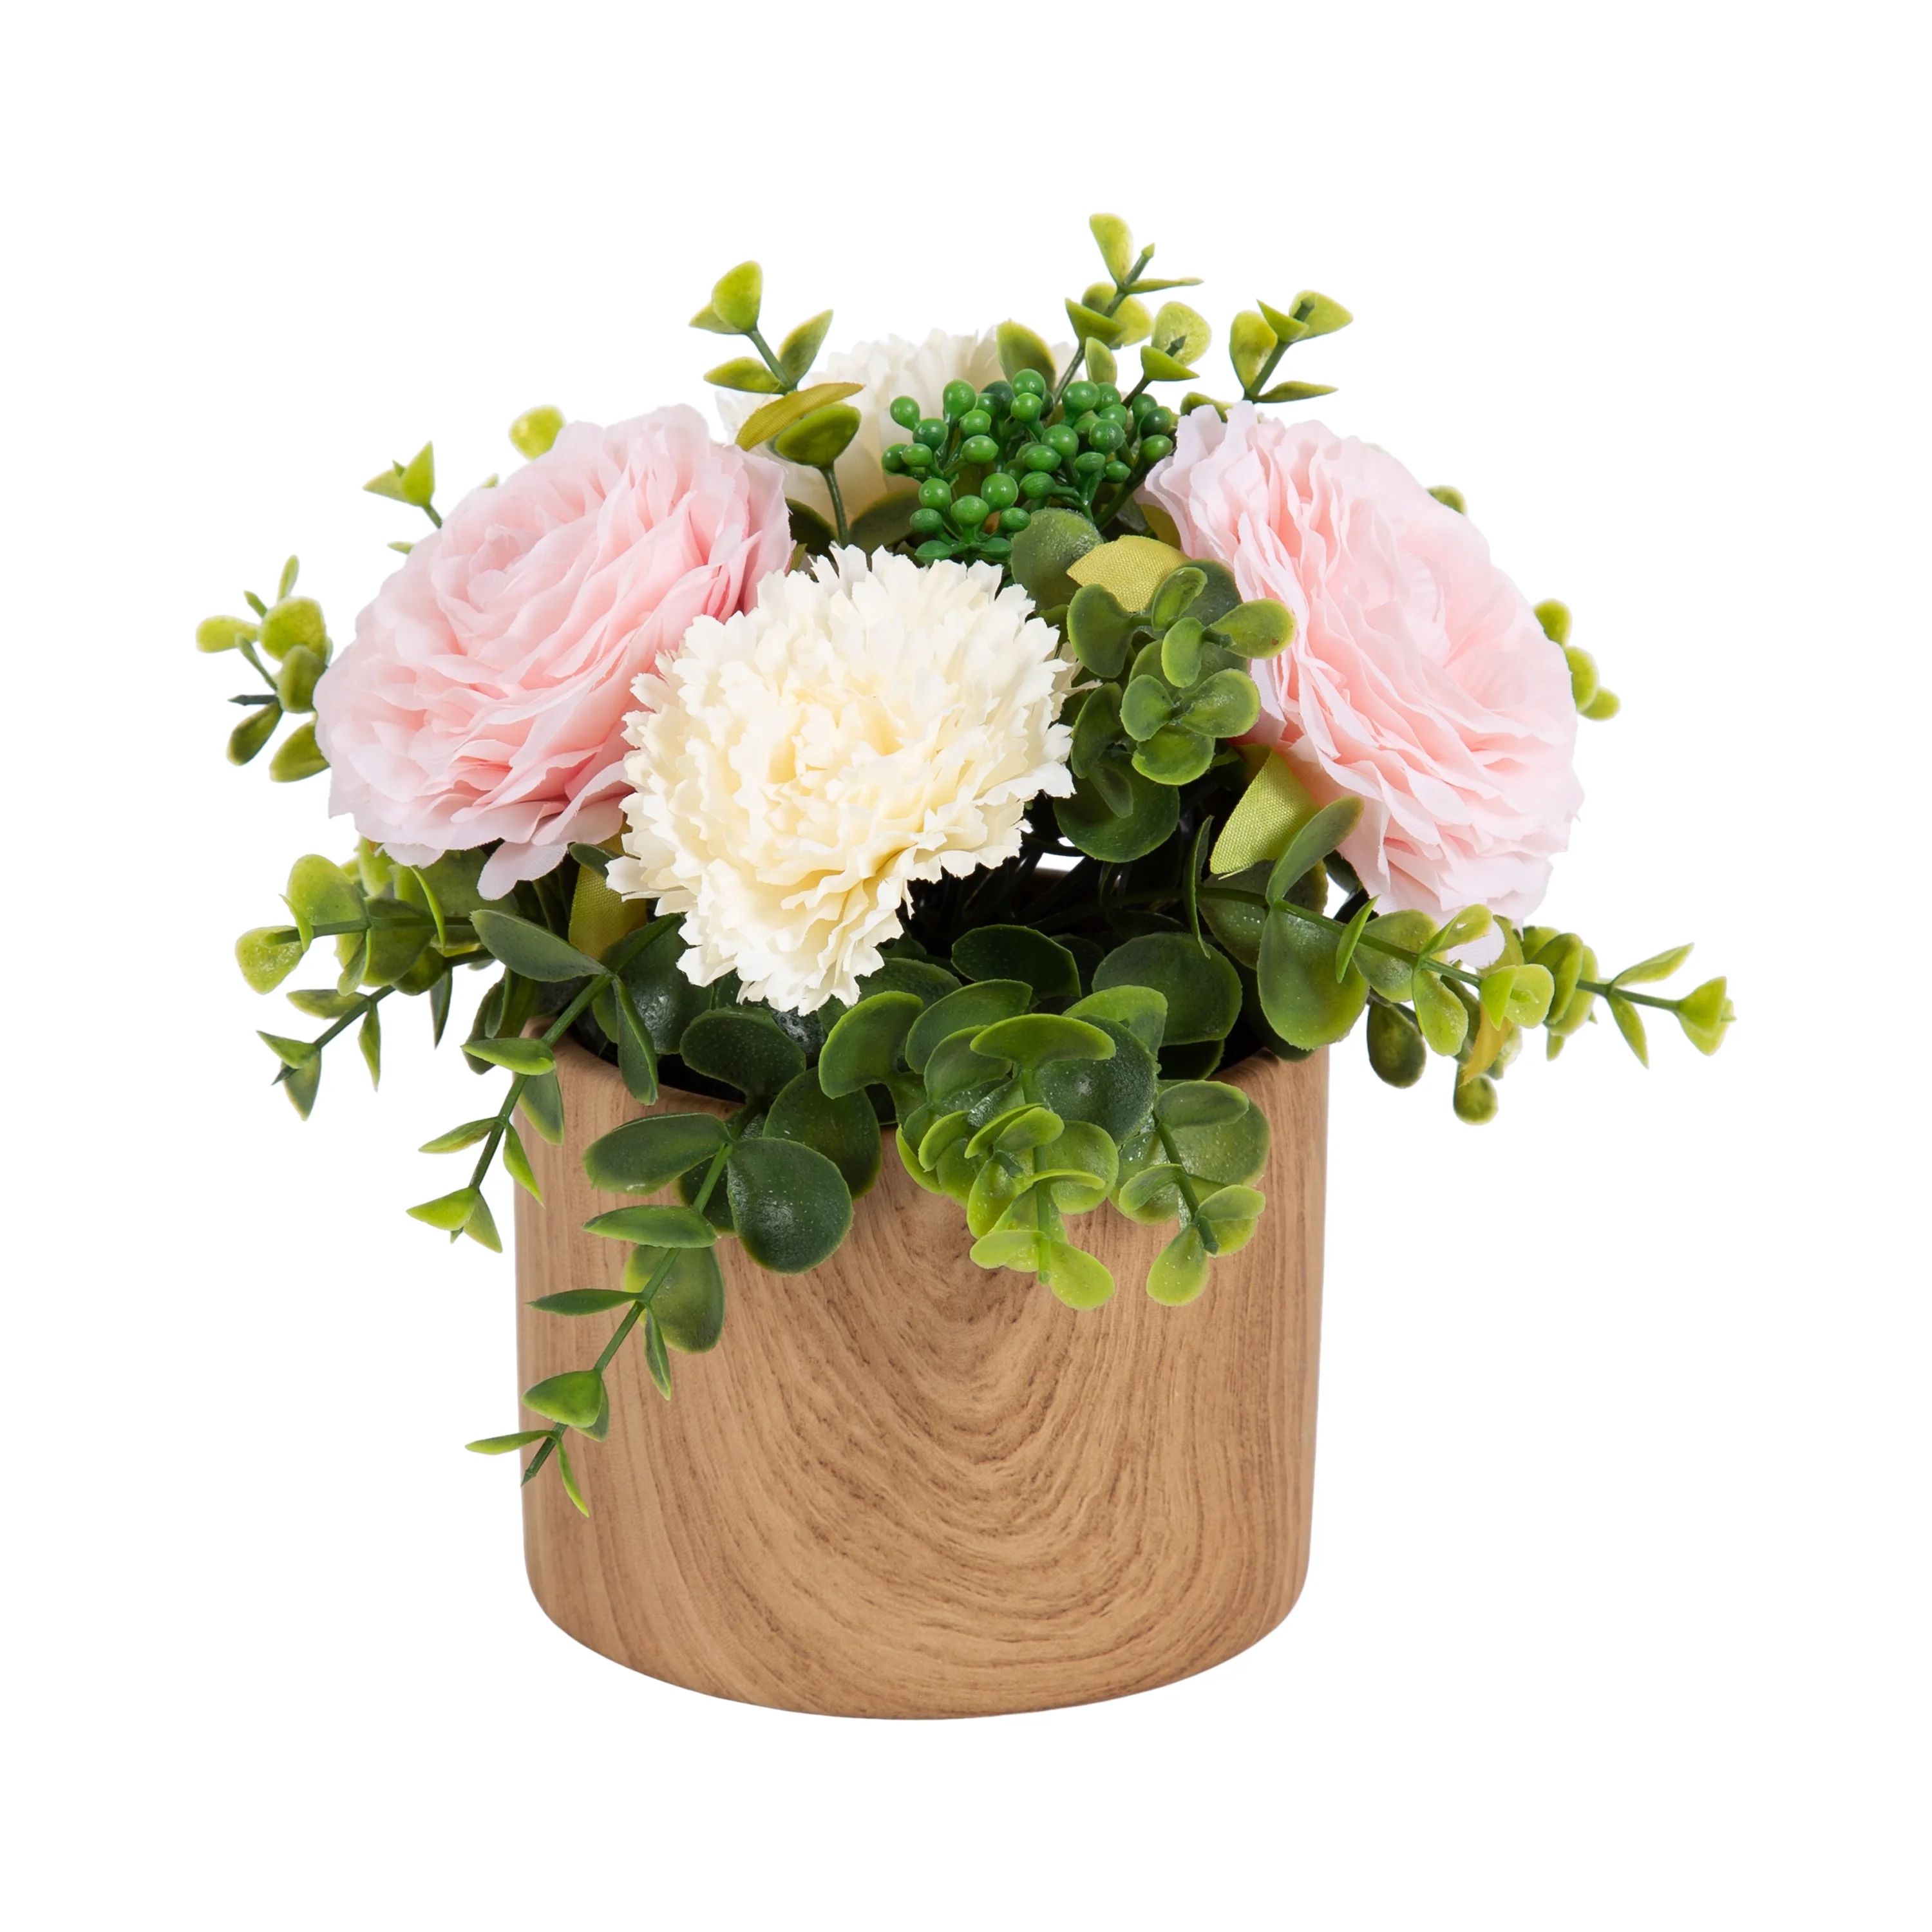 Better Homes & Gardens 8.0” x 4.5” Artificial Floral in Wood Grain Ceramic Container | Walmart (US)